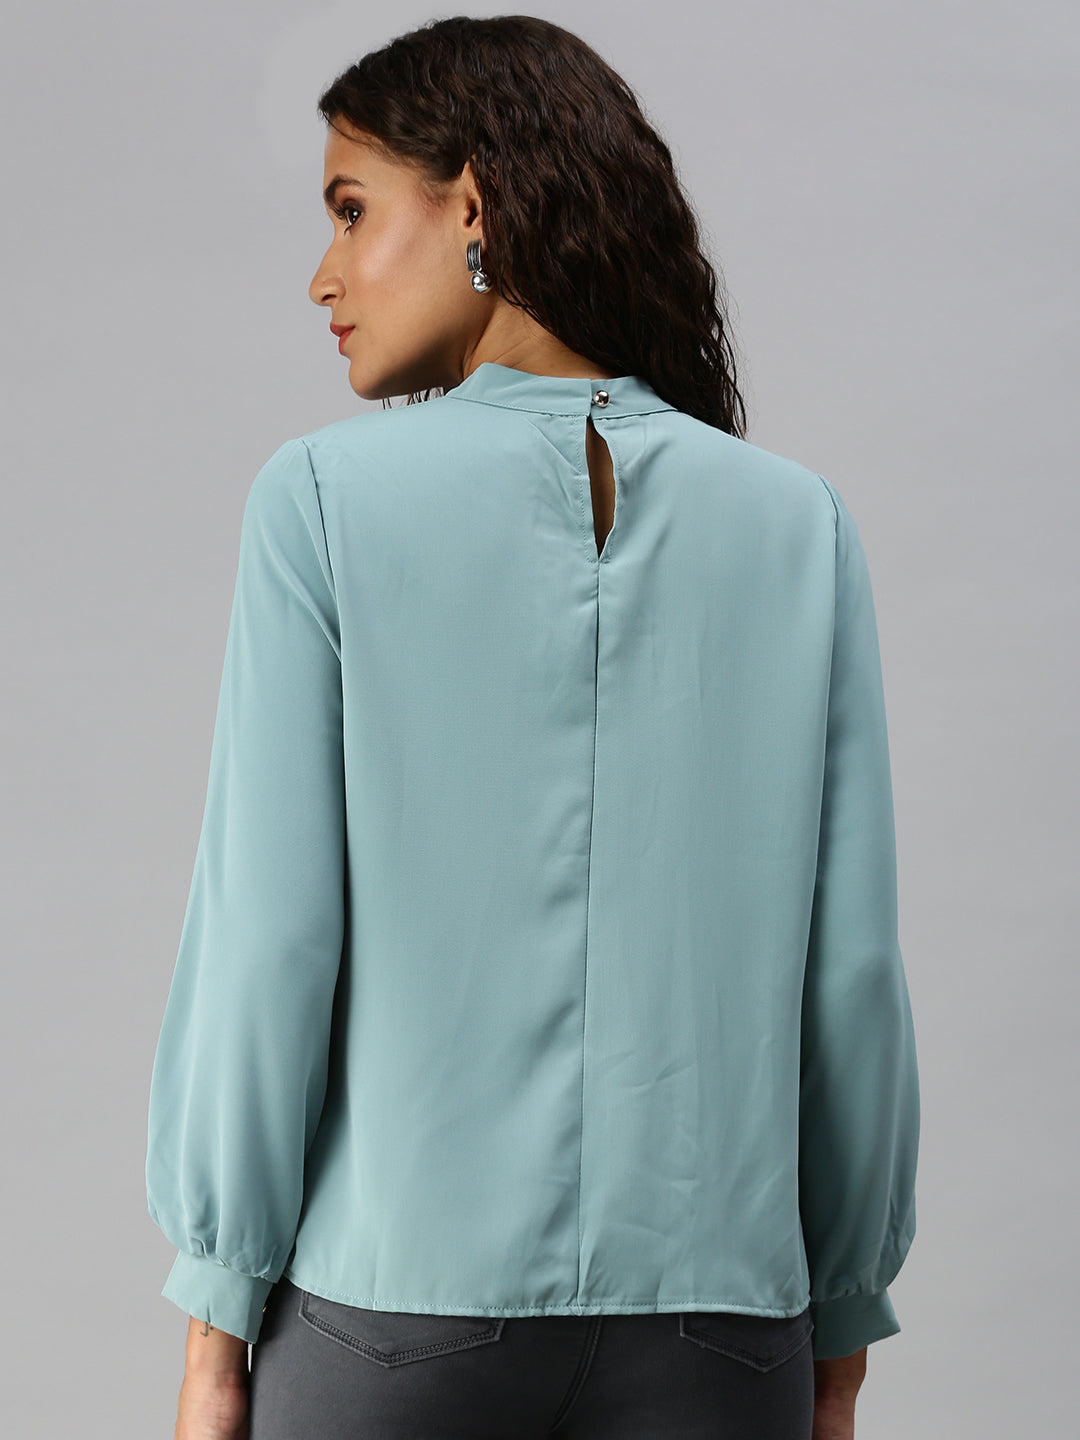 Women Solid Turquoise Blue Top